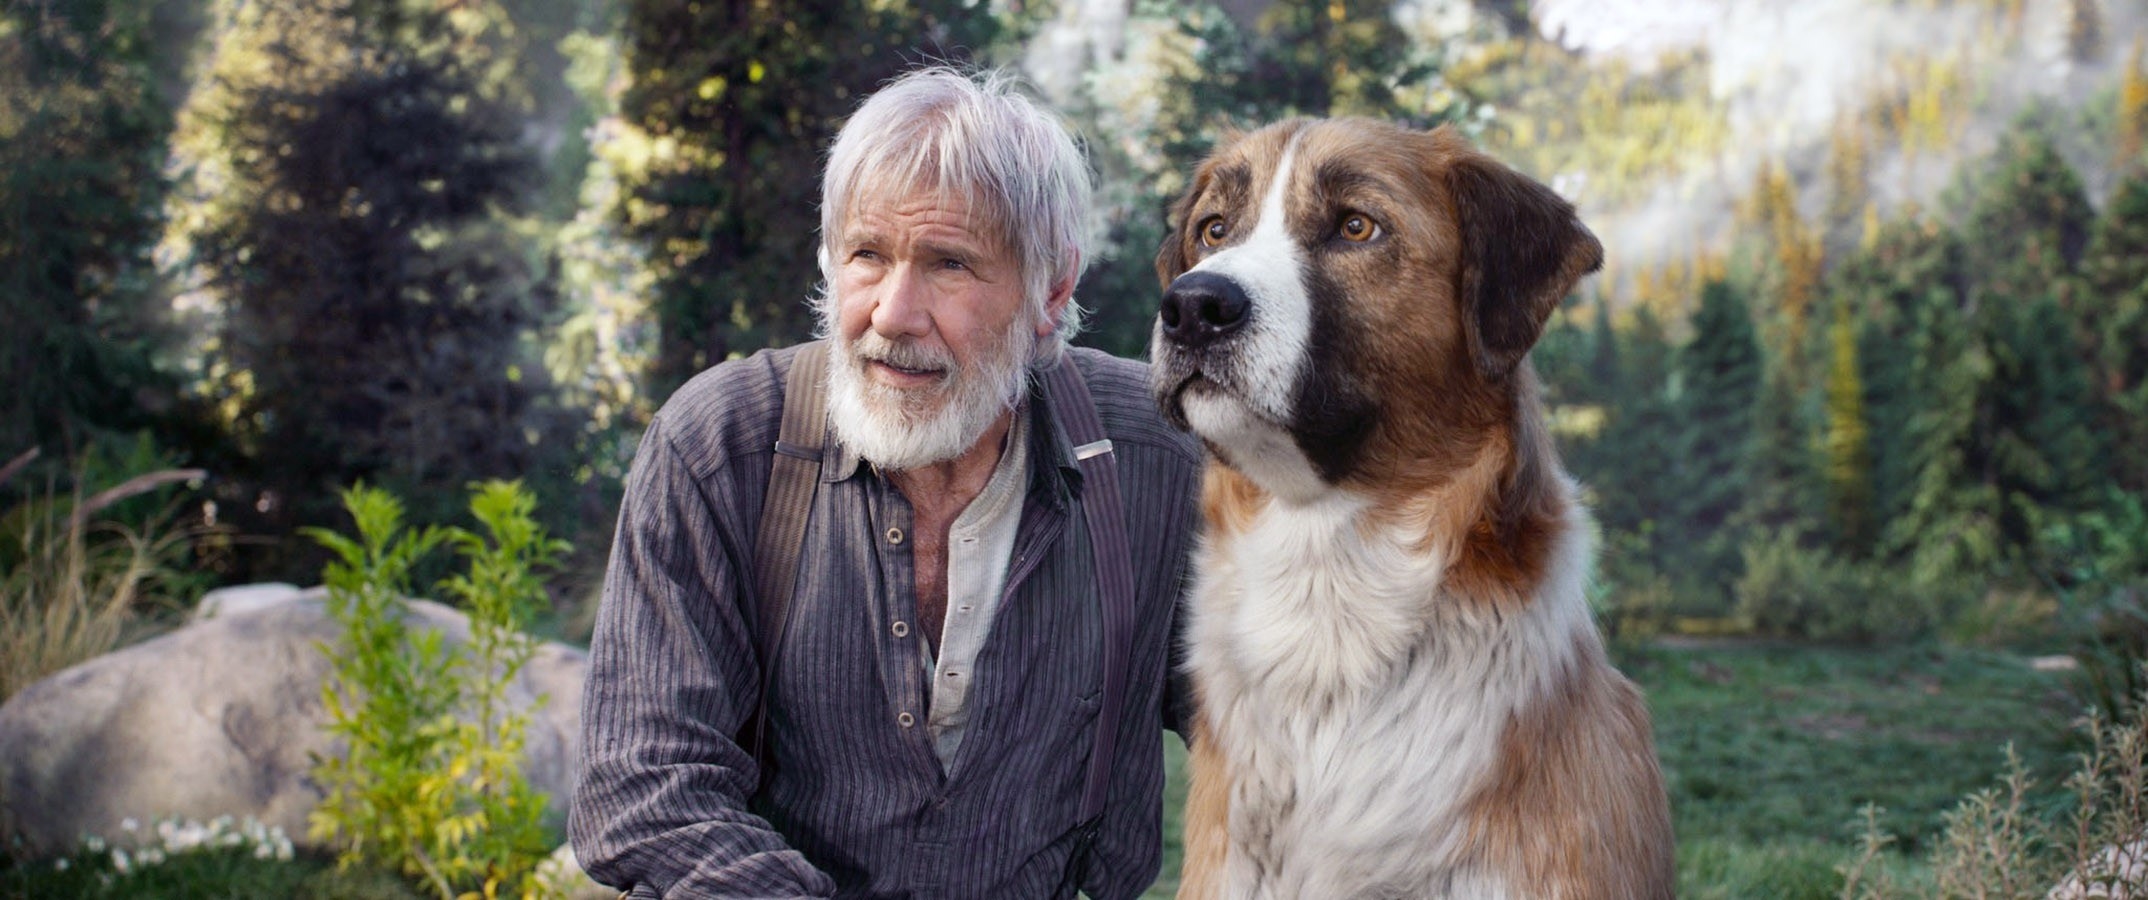 Harrison Ford and a St. Bernard dog in the wild